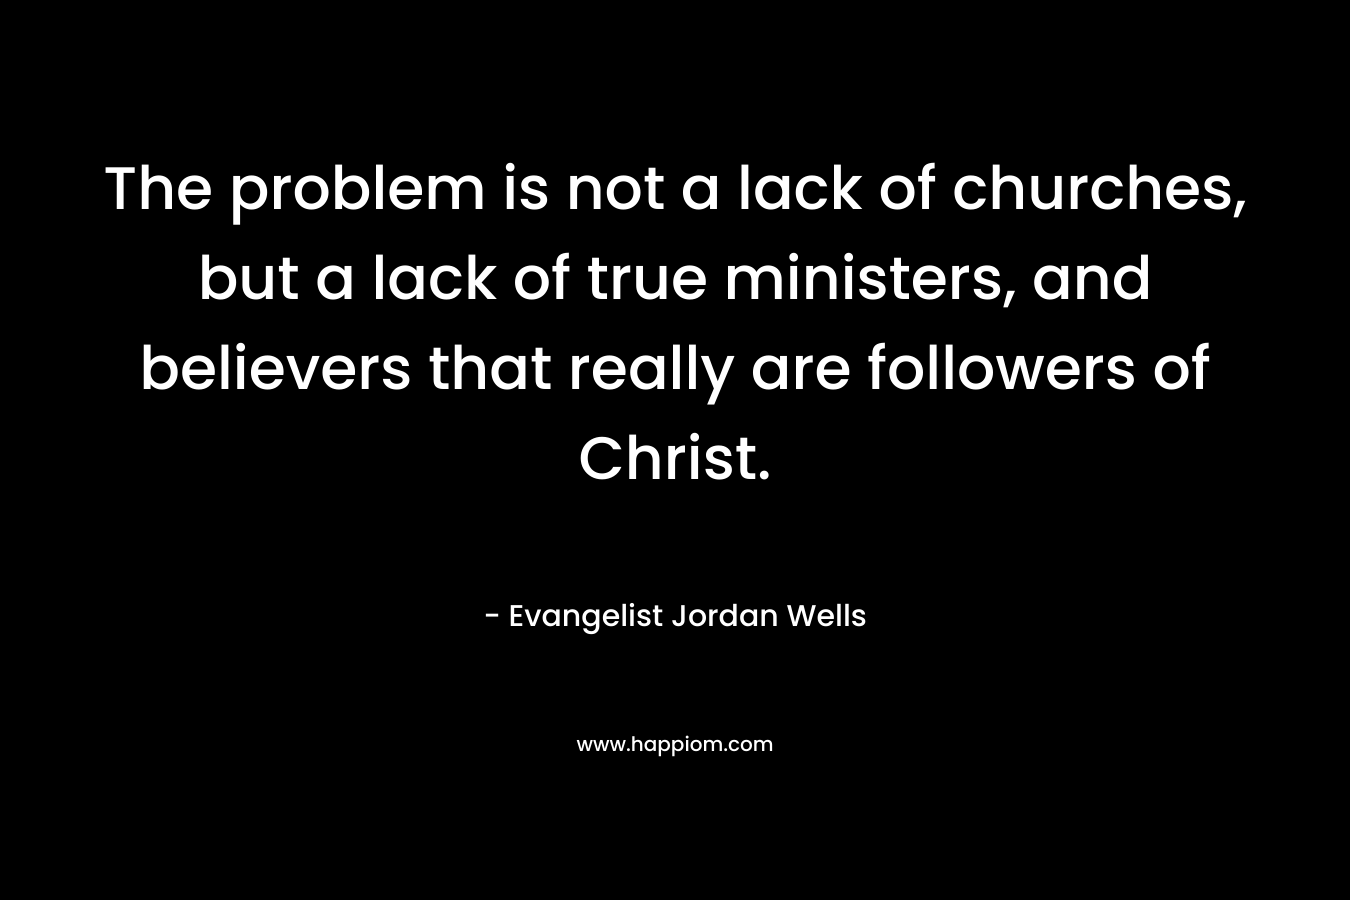 The problem is not a lack of churches, but a lack of true ministers, and believers that really are followers of Christ. – Evangelist Jordan Wells